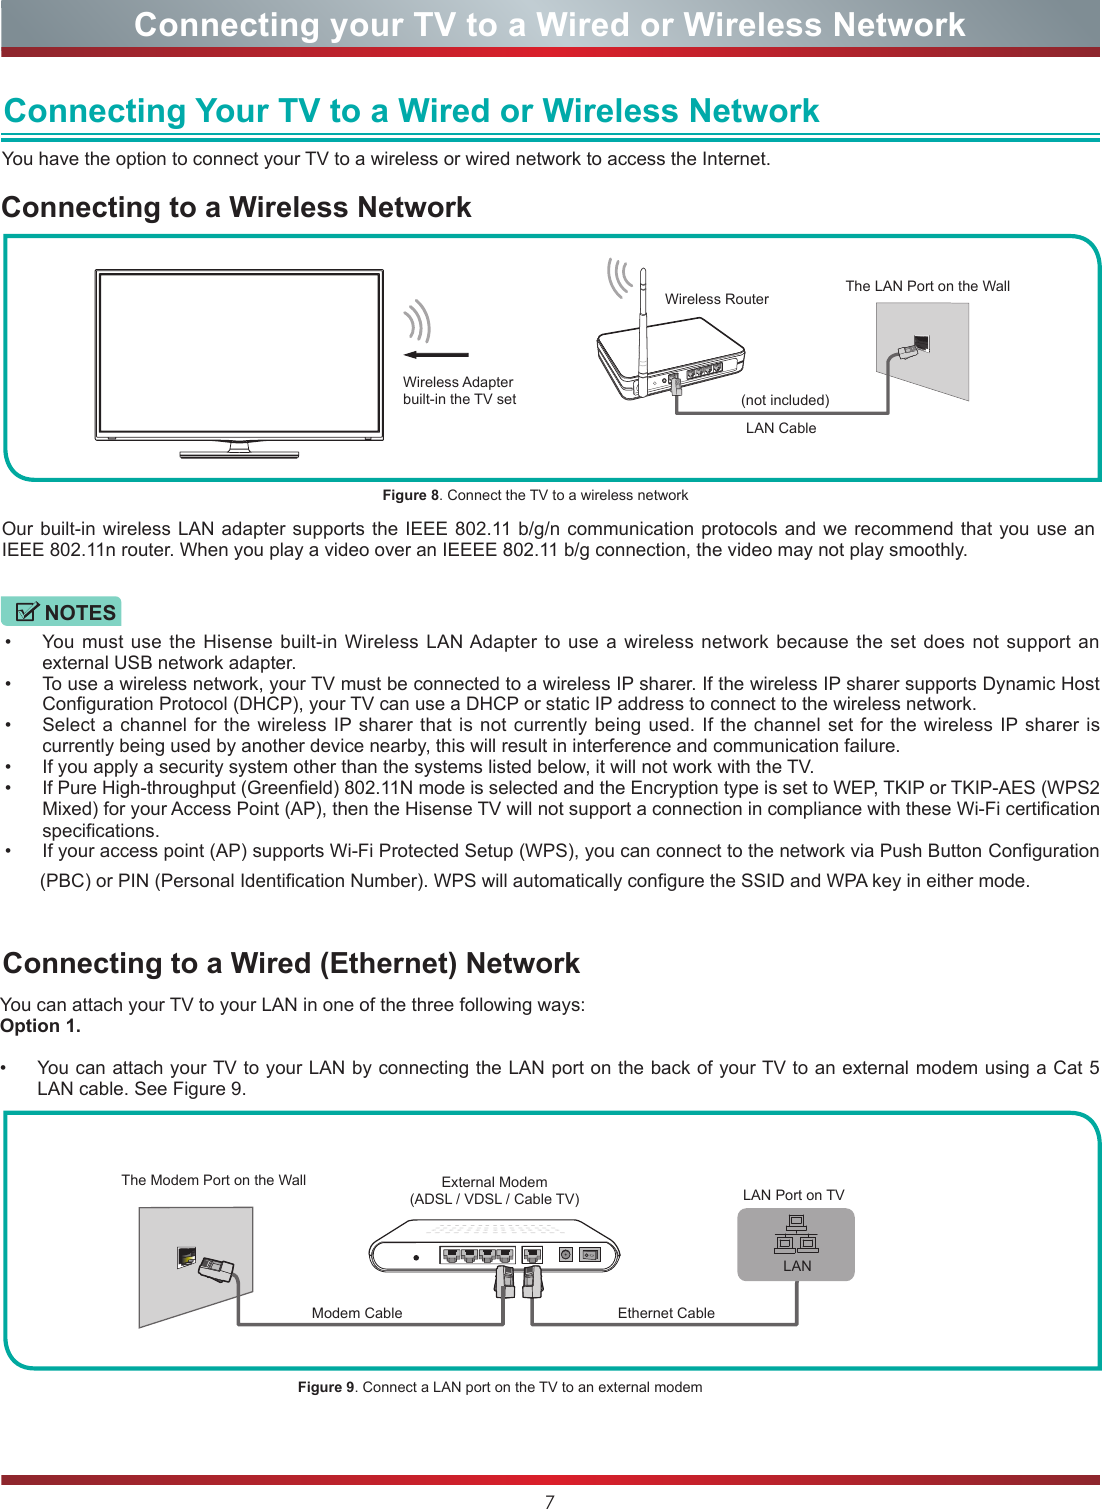 7Connecting your TV to a Wired or Wireless NetworkWireless Adapter built-in the TV setLAN CableWireless Router The LAN Port on the WallConnecting Your TV to a Wired or Wireless NetworkConnecting to a Wired (Ethernet) NetworkYou have the option to connect your TV to a wireless or wired network to access the Internet. You can attach your TV to your LAN in one of the three following ways:Option 1.• You can attach your TV to your LAN by connecting the LAN port on the back of your TV to an external modem using a Cat 5 LAN cable. See Figure 9.(PBC) or PIN (Personal Identification Number). WPS will automatically configure the SSID and WPA key in either mode.Our built-in wireless LAN adapter supports the IEEE 802.11 b/g/n communication protocols and we recommend that you use an IEEE 802.11n router. When you play a video over an IEEEE 802.11 b/g connection, the video may not play smoothly.• You must use the Hisense built-in Wireless LAN Adapter to use a wireless network because the set does not support an external USB network adapter.• To use a wireless network, your TV must be connected to a wireless IP sharer. If the wireless IP sharer supports Dynamic Host Configuration Protocol (DHCP), your TV can use a DHCP or static IP address to connect to the wireless network.• Select a channel for the wireless IP sharer that is not currently being used. If the channel set for the wireless IP sharer is currently being used by another device nearby, this will result in interference and communication failure.• If you apply a security system other than the systems listed below, it will not work with the TV.• If Pure High-throughput (Greenfield) 802.11N mode is selected and the Encryption type is set to WEP, TKIP or TKIP-AES (WPS2 Mixed) for your Access Point (AP), then the Hisense TV will not support a connection in compliance with these Wi-Fi certification specifications.• If your access point (AP) supports Wi-Fi Protected Setup (WPS), you can connect to the network via Push Button Configuration Figure 8. Connect the TV to a wireless networkFigure 9. Connect a LAN port on the TV to an external modemConnecting to a Wireless Network(not included)NOTESExternal Modem(ADSL / VDSL / Cable TV) Ethernet Cable Modem Cable The Modem Port on the WallLAN Port on TVLAN